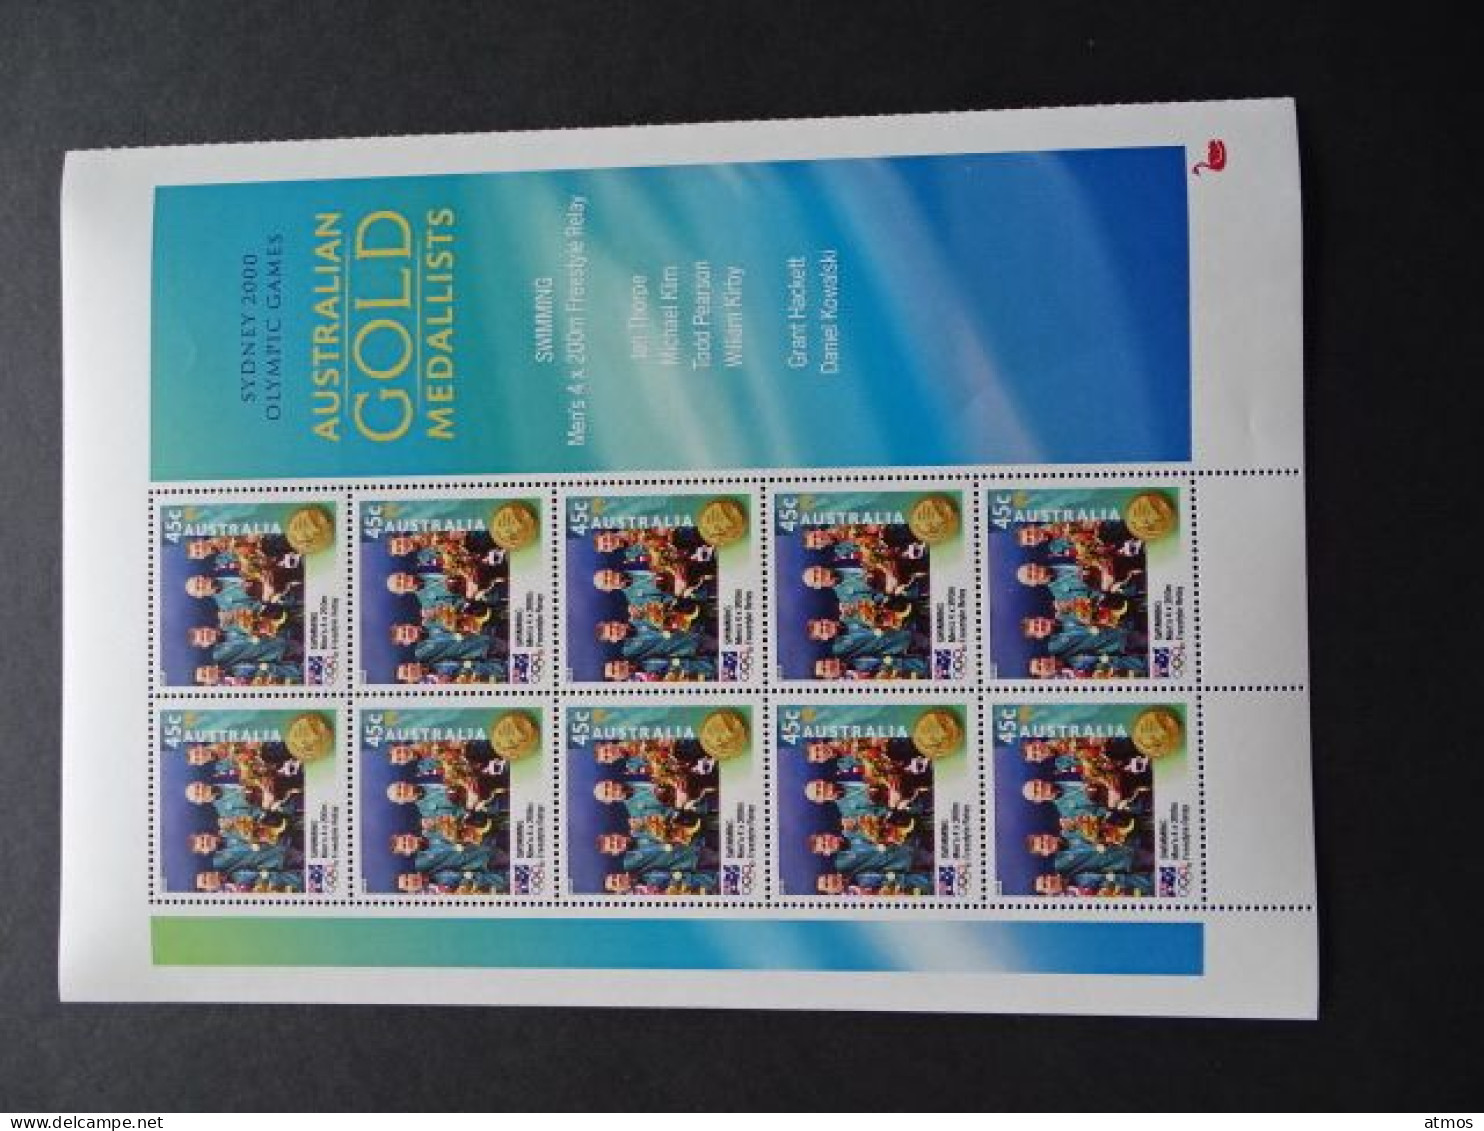 Australia MNH Michel Nr 1978 Sheet Of 10 From 2000 WA - Mint Stamps